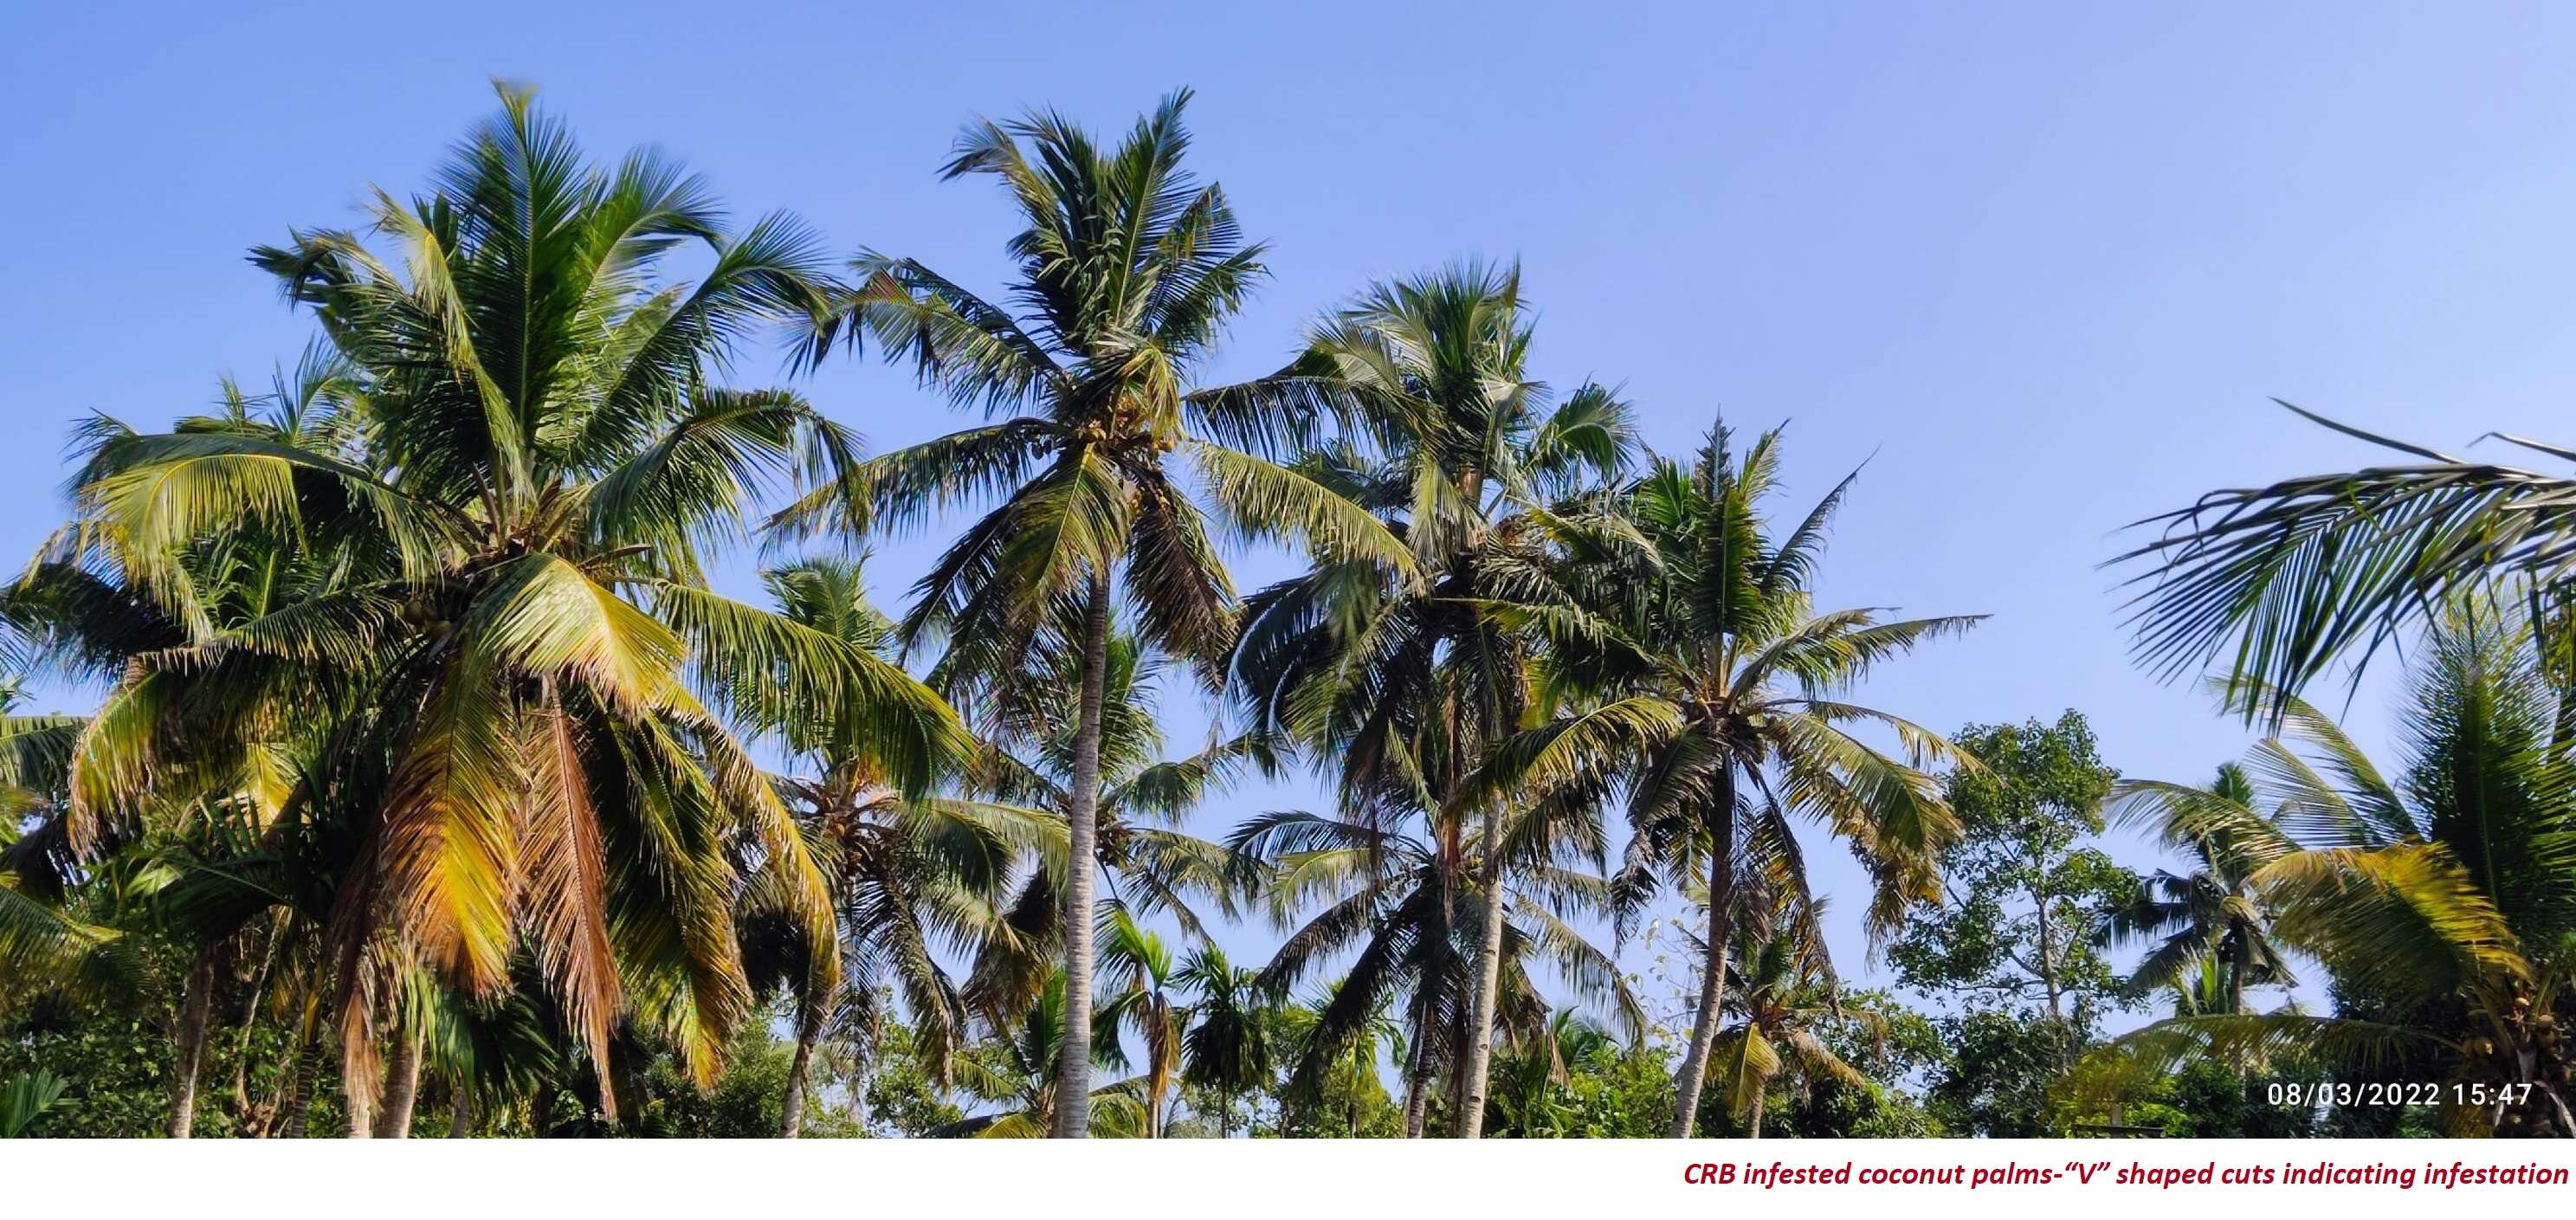 CRB infested coconut palms (‘V’shaped cuts of pest infestation symptoms can be seen)